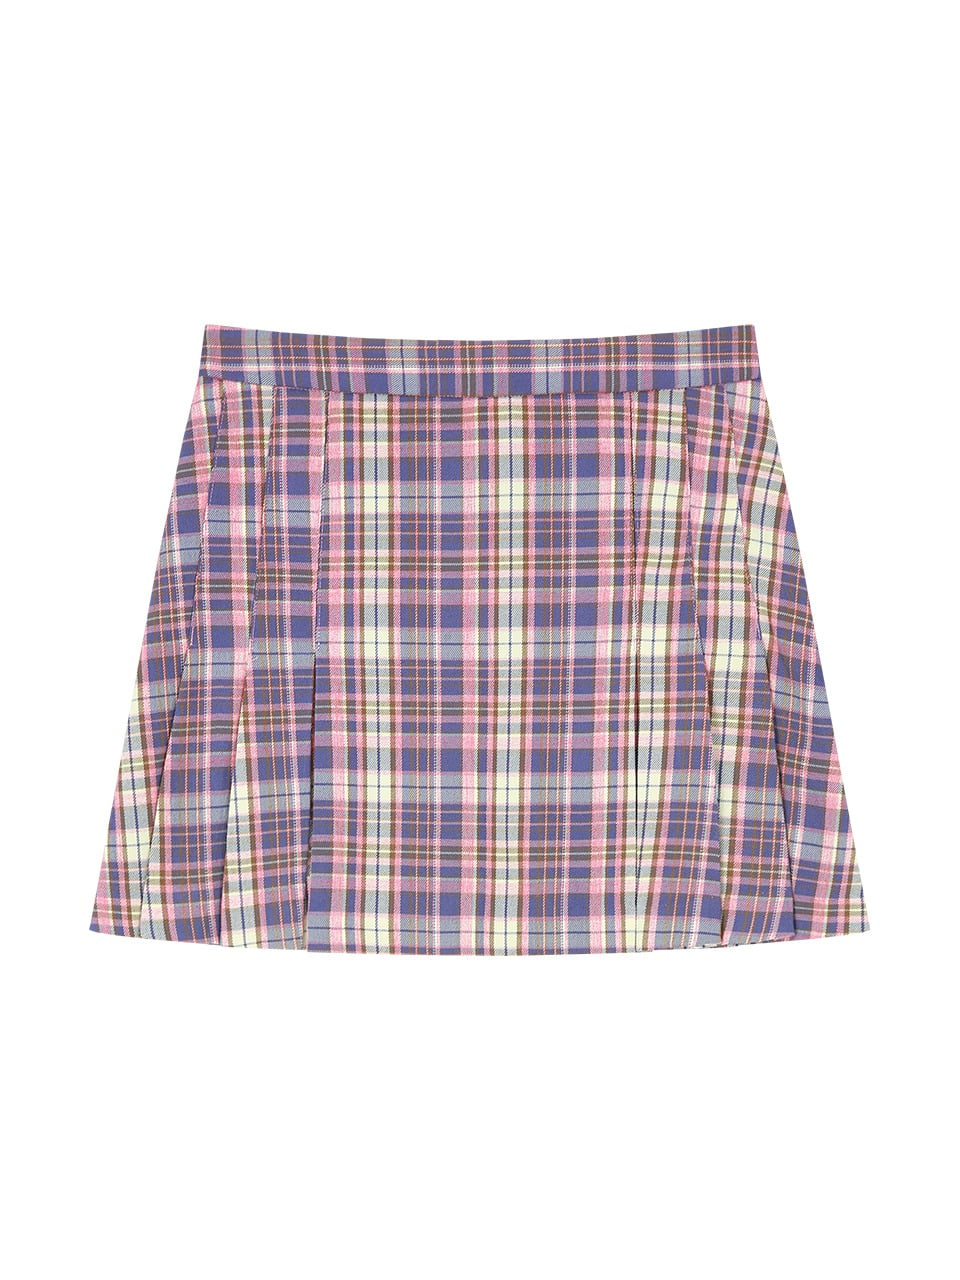 CANDY CHECK SKIRT (PINK)